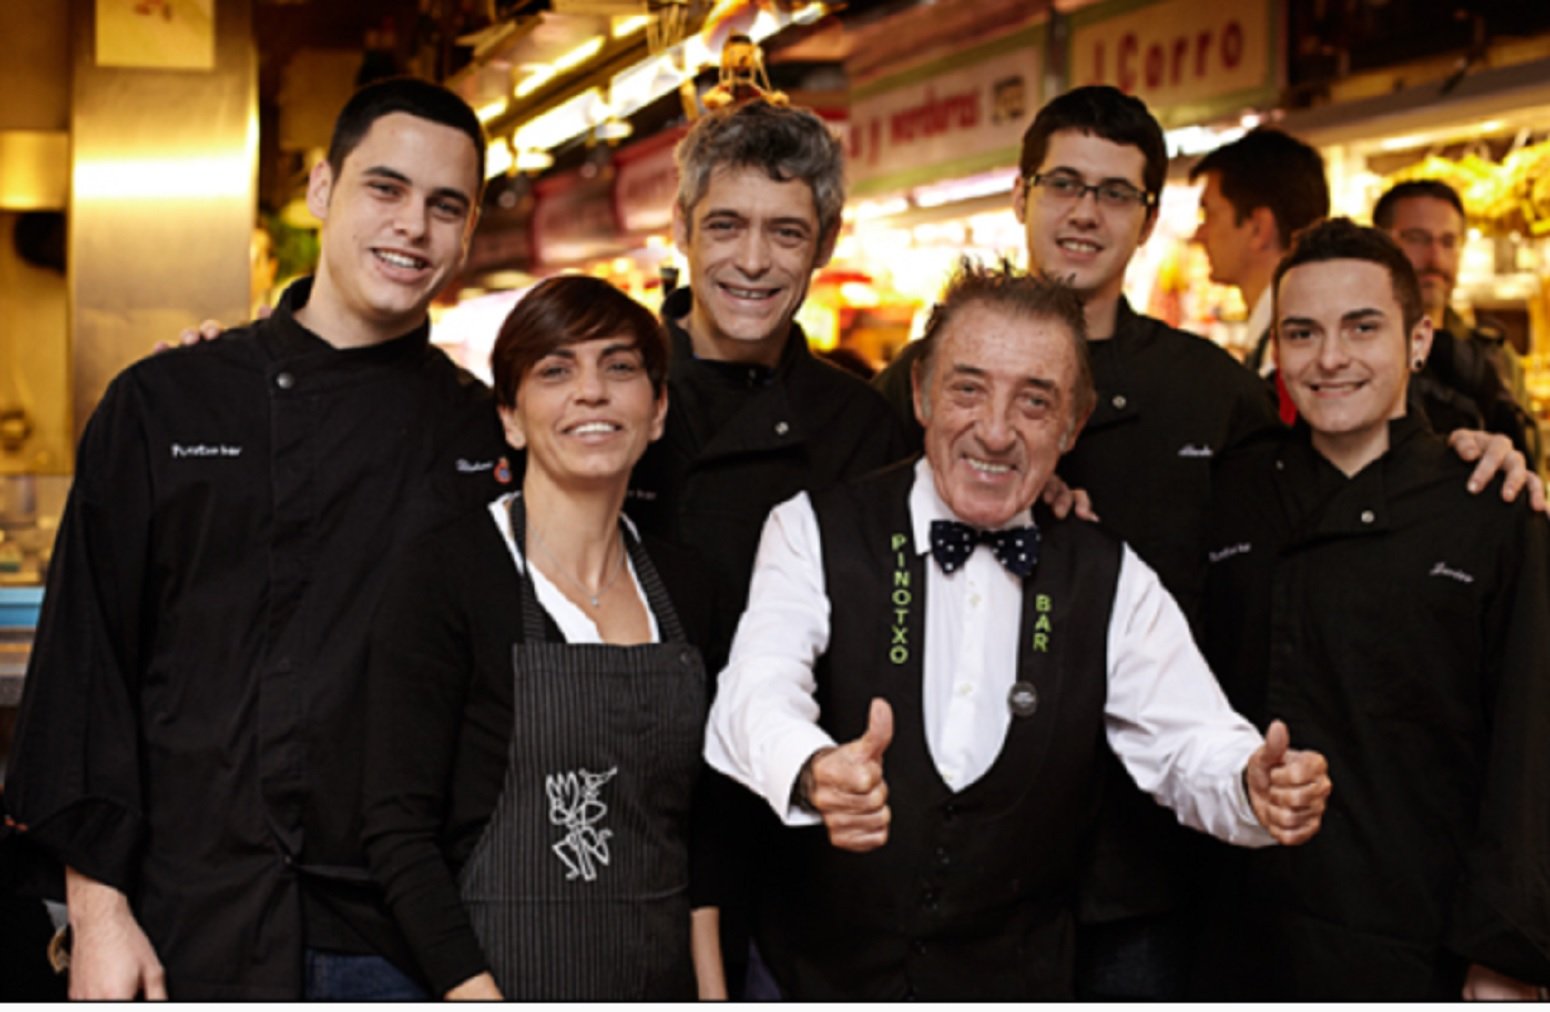 A classic Barcelona bar, the Pinotxo in the Boqueria market, closes due to family differences